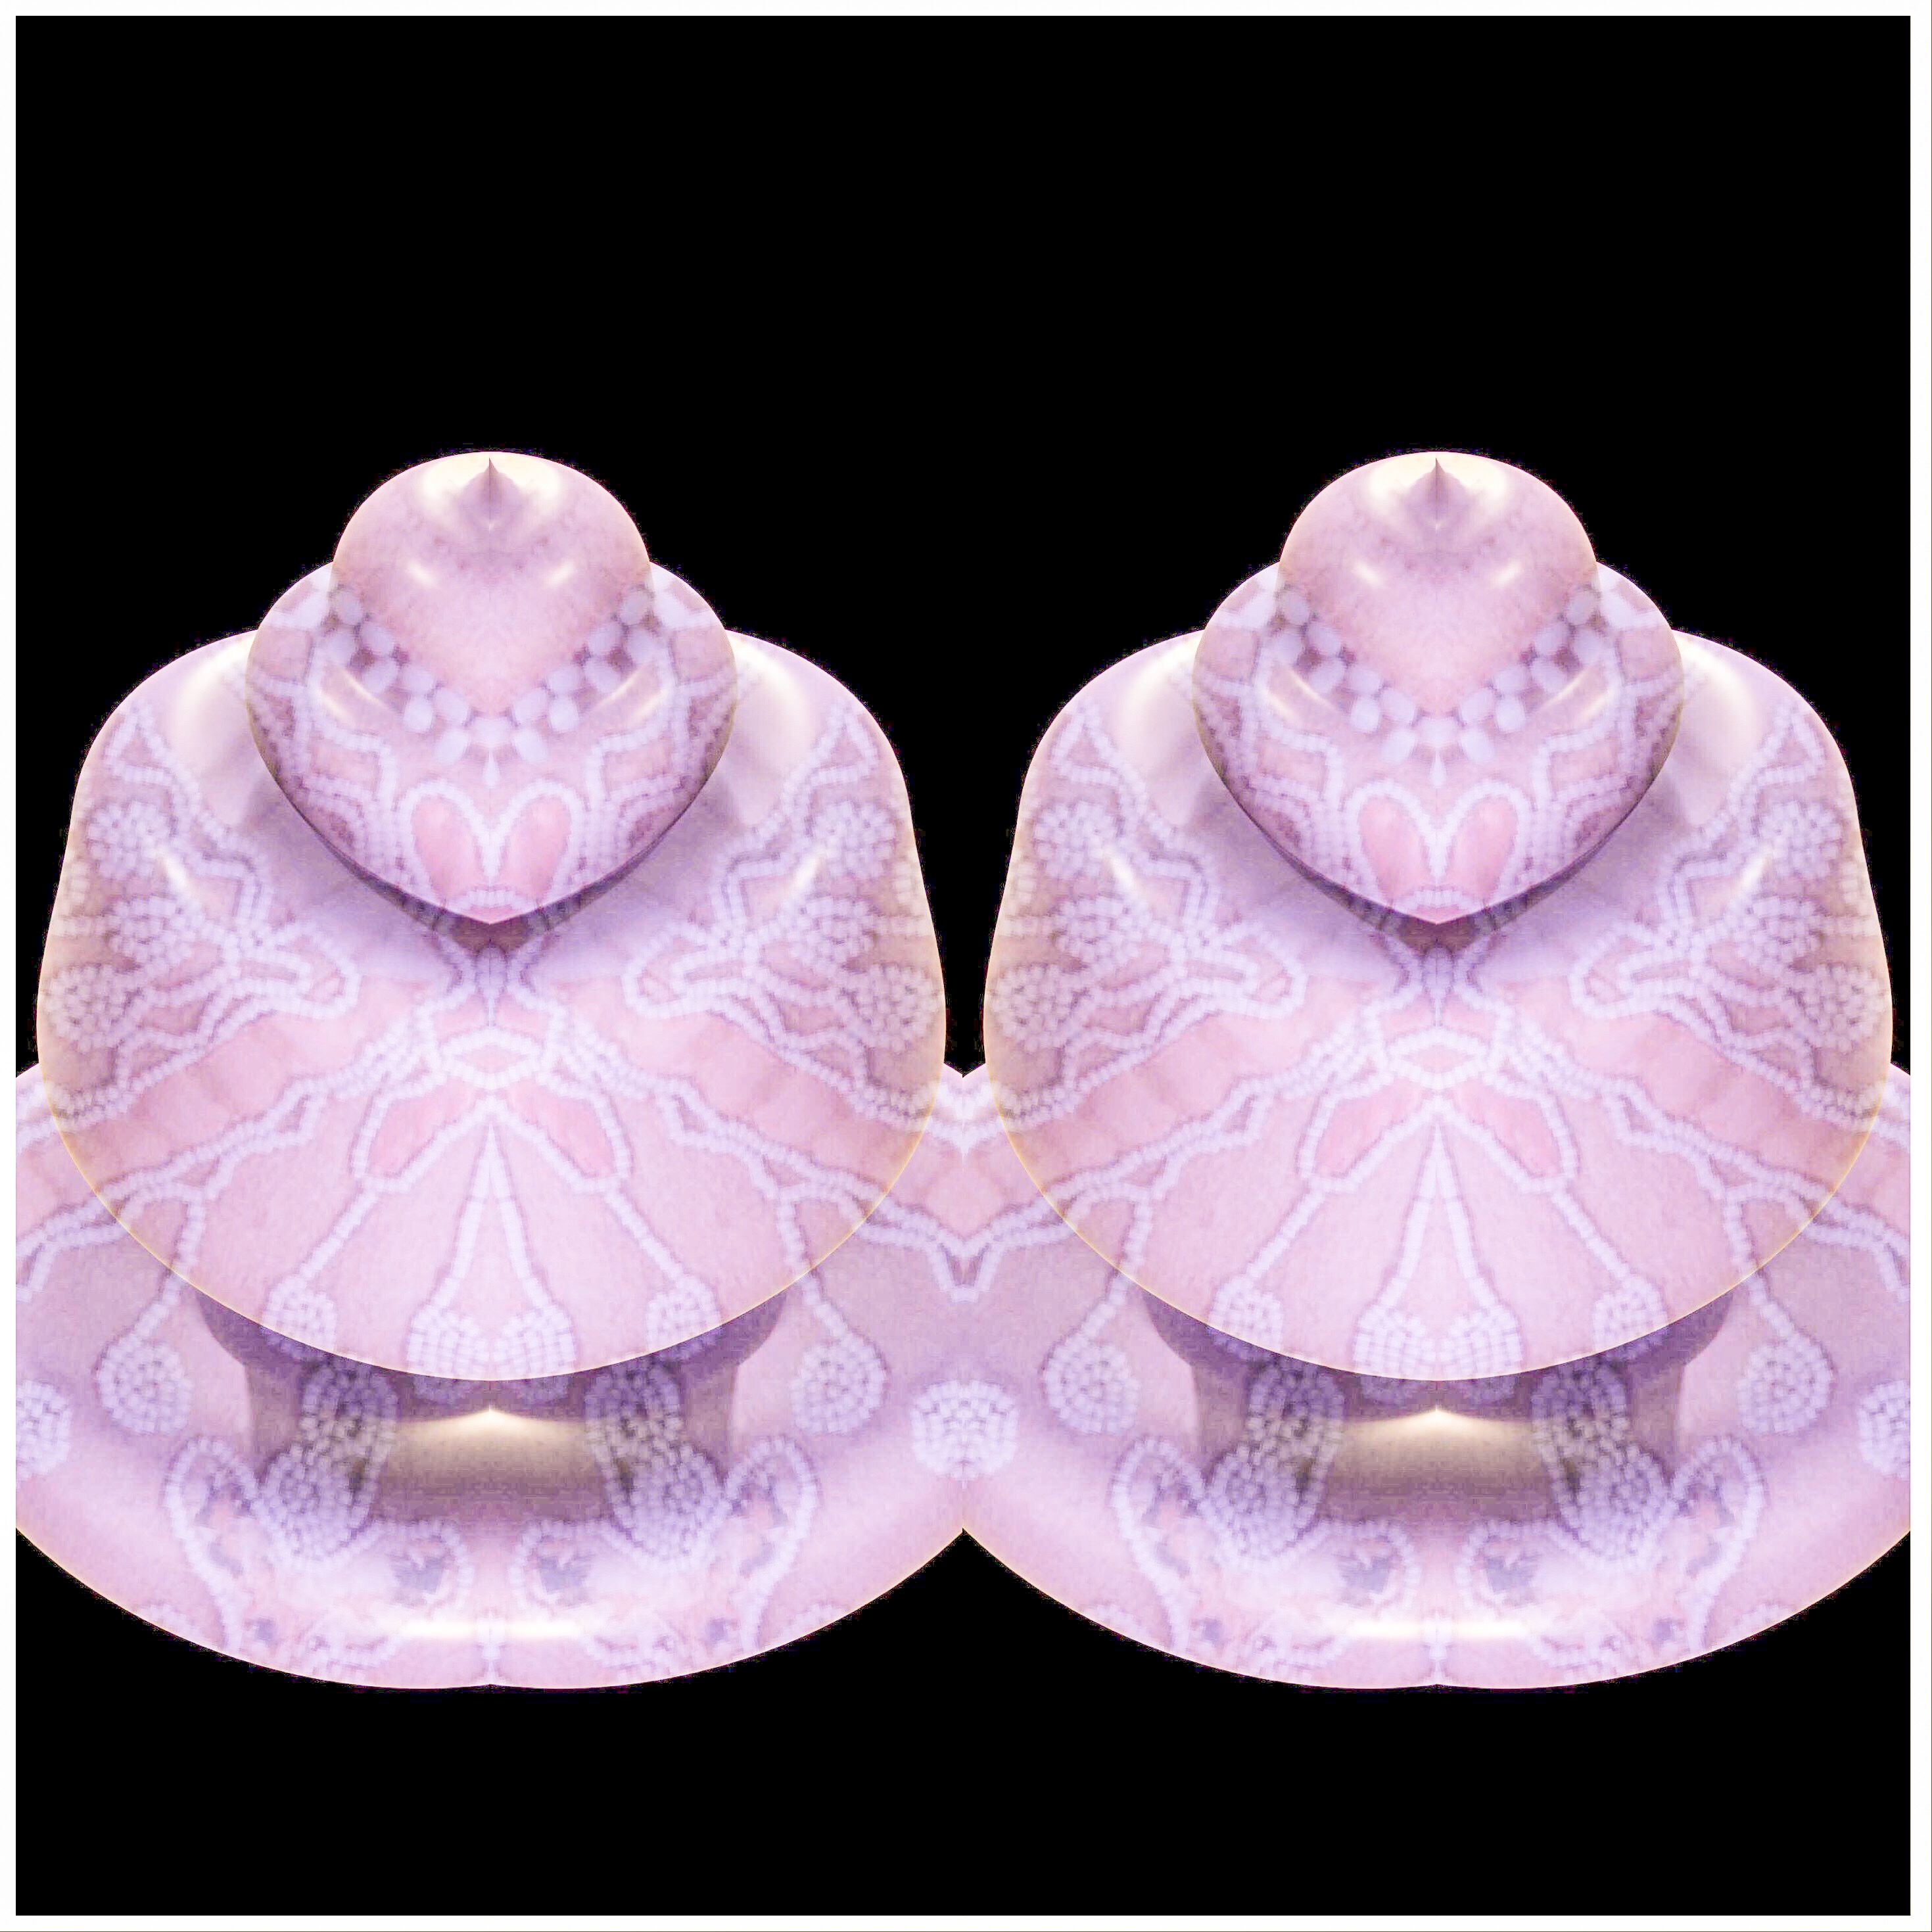 An image of beadwork from the Haudenosaunee Confederacy made in 3D software using images from museum collections of beadwork. Colors include silver, gold, pink, blue, and purple. It looks similar to a shell or a river clam.